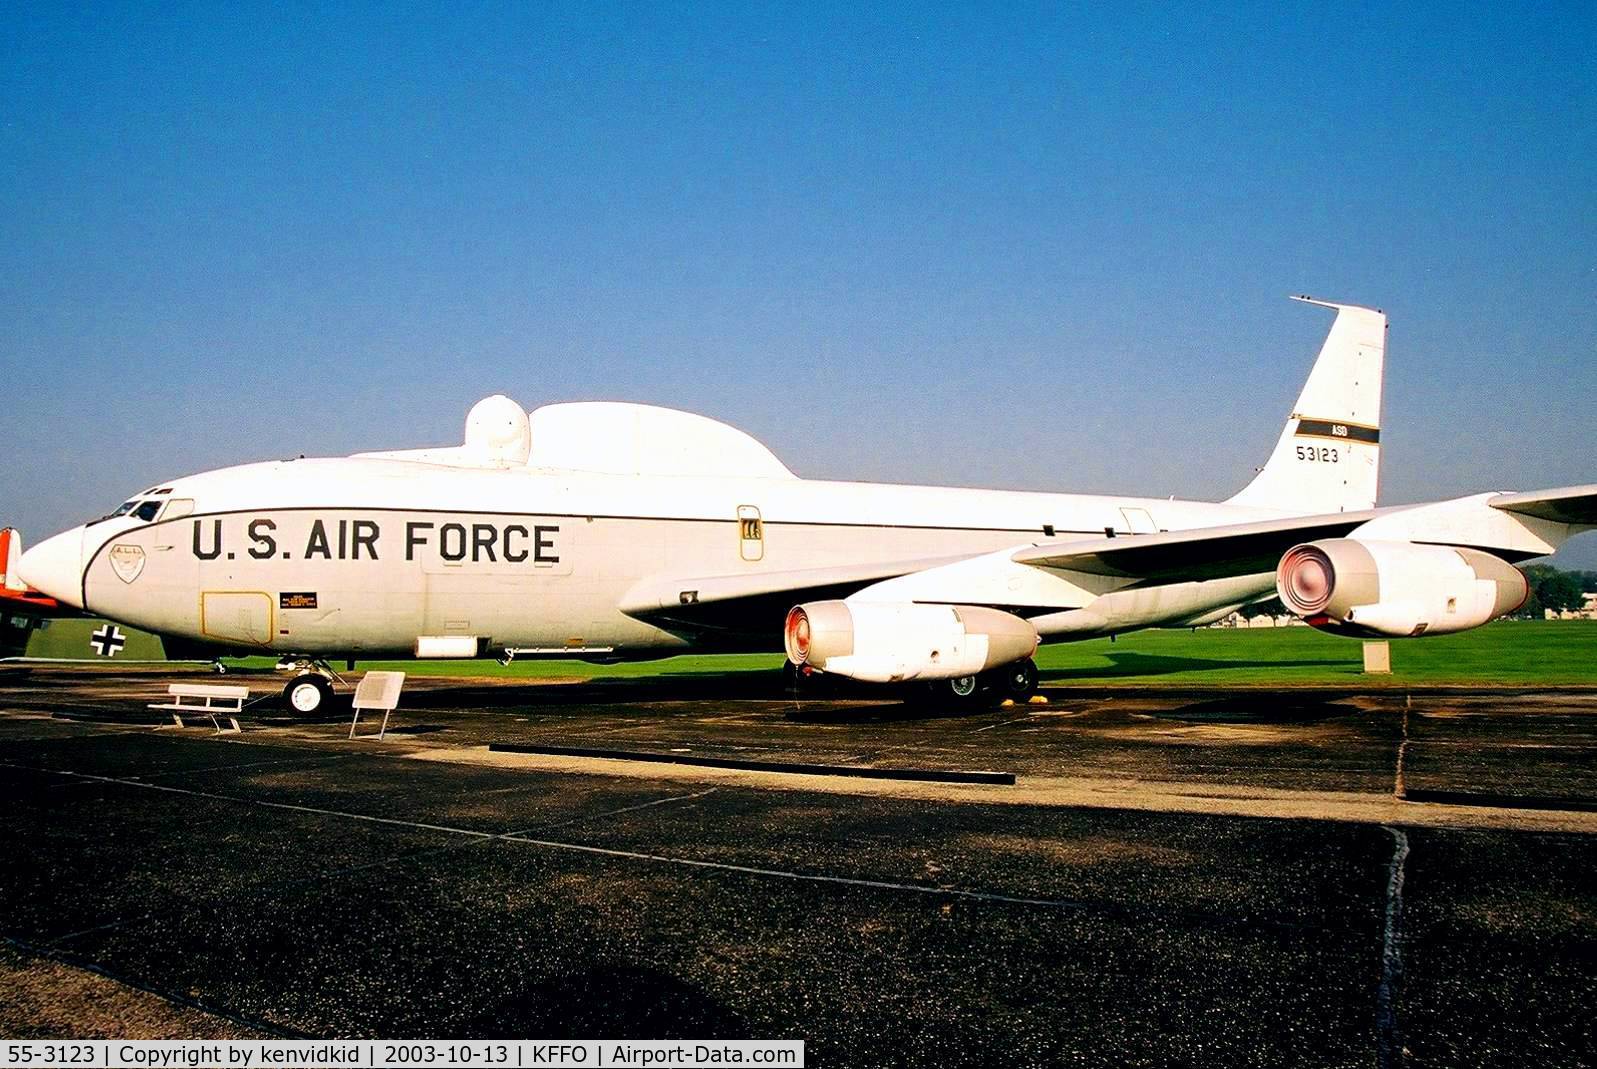 55-3123, 1955 Boeing NKC-135A-BN Stratotanker C/N 17239, At the Museum of the United States Air Force Dayton Ohio.